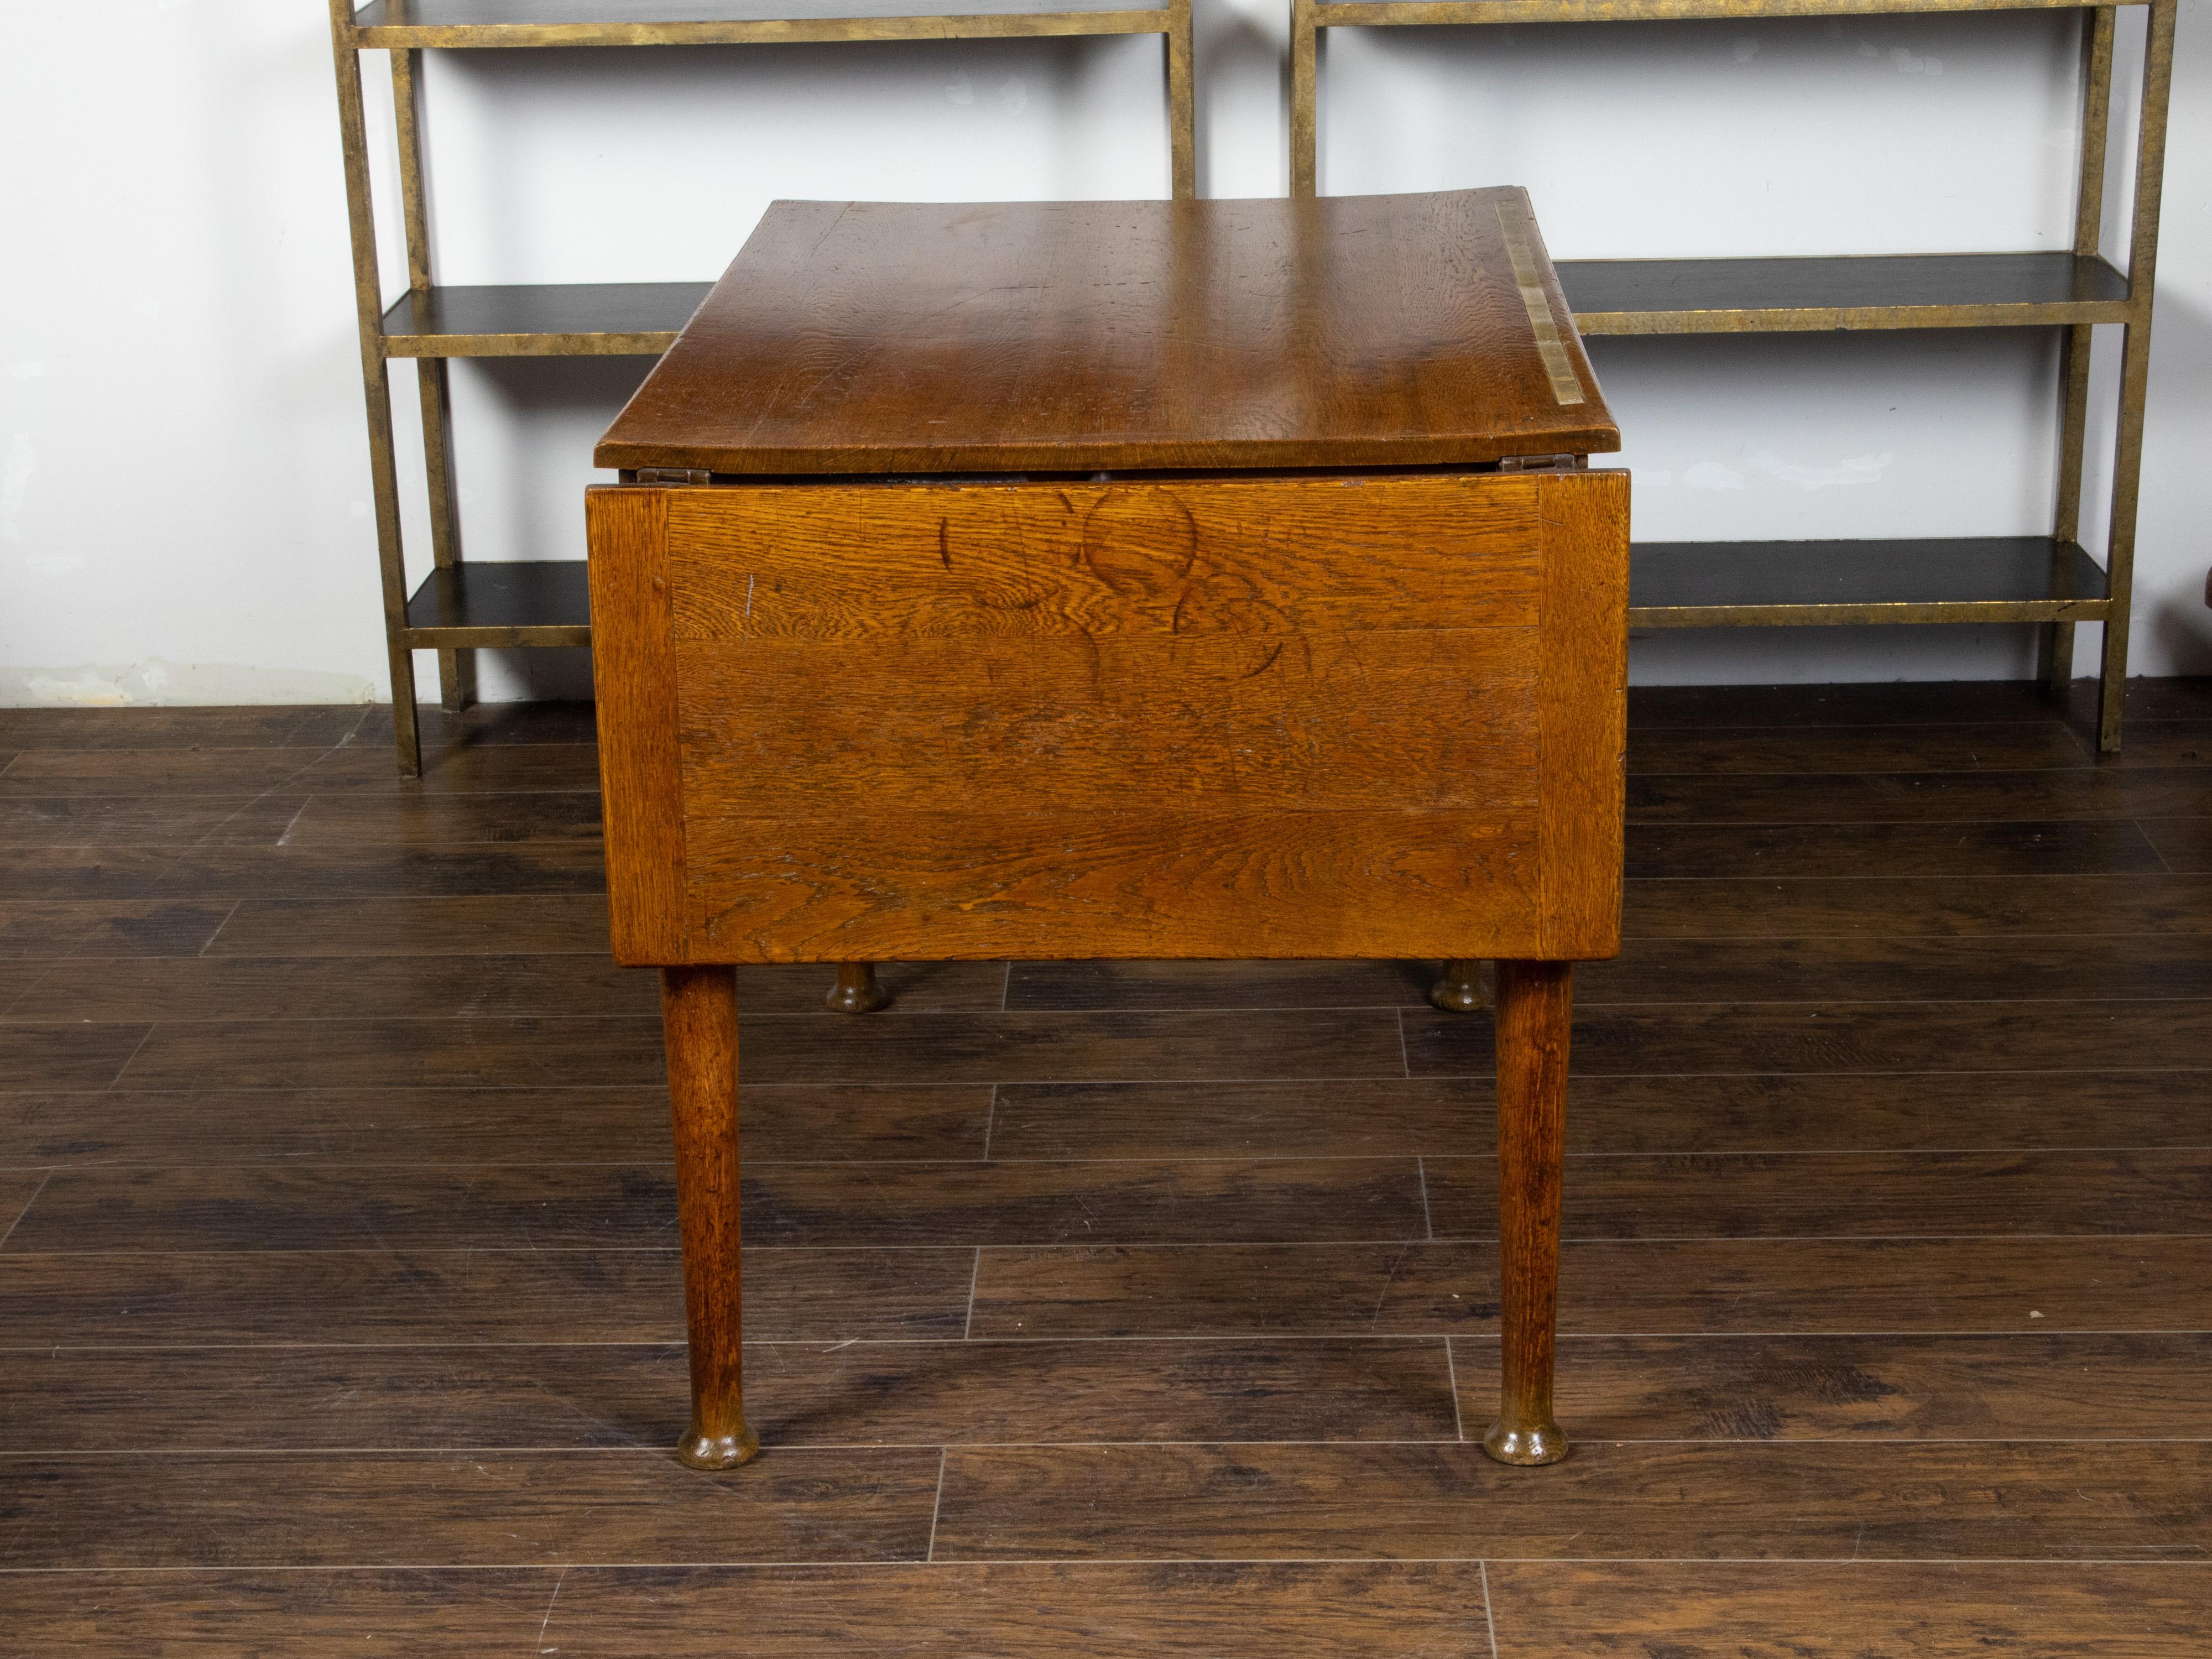 English 19th Century Oak Drop Leaves Draper's Table with Brass Measuring Tape For Sale 3